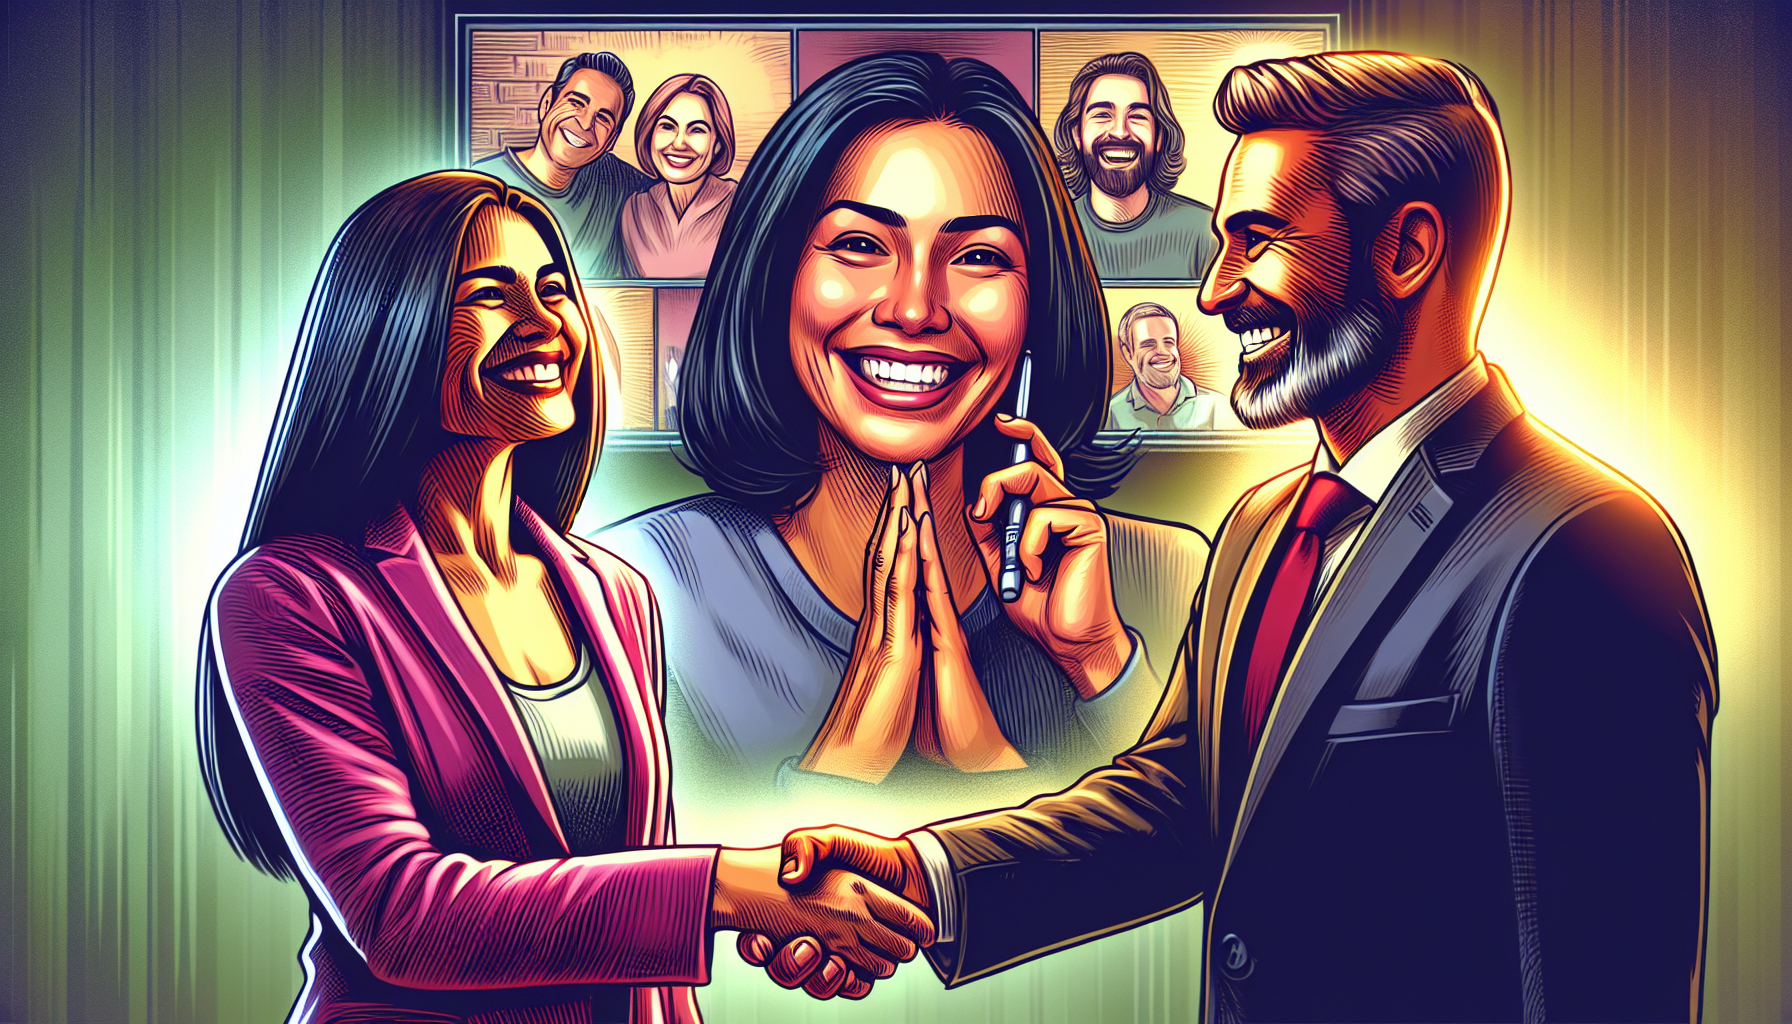 Illustration of a handshake between a customer and a business owner